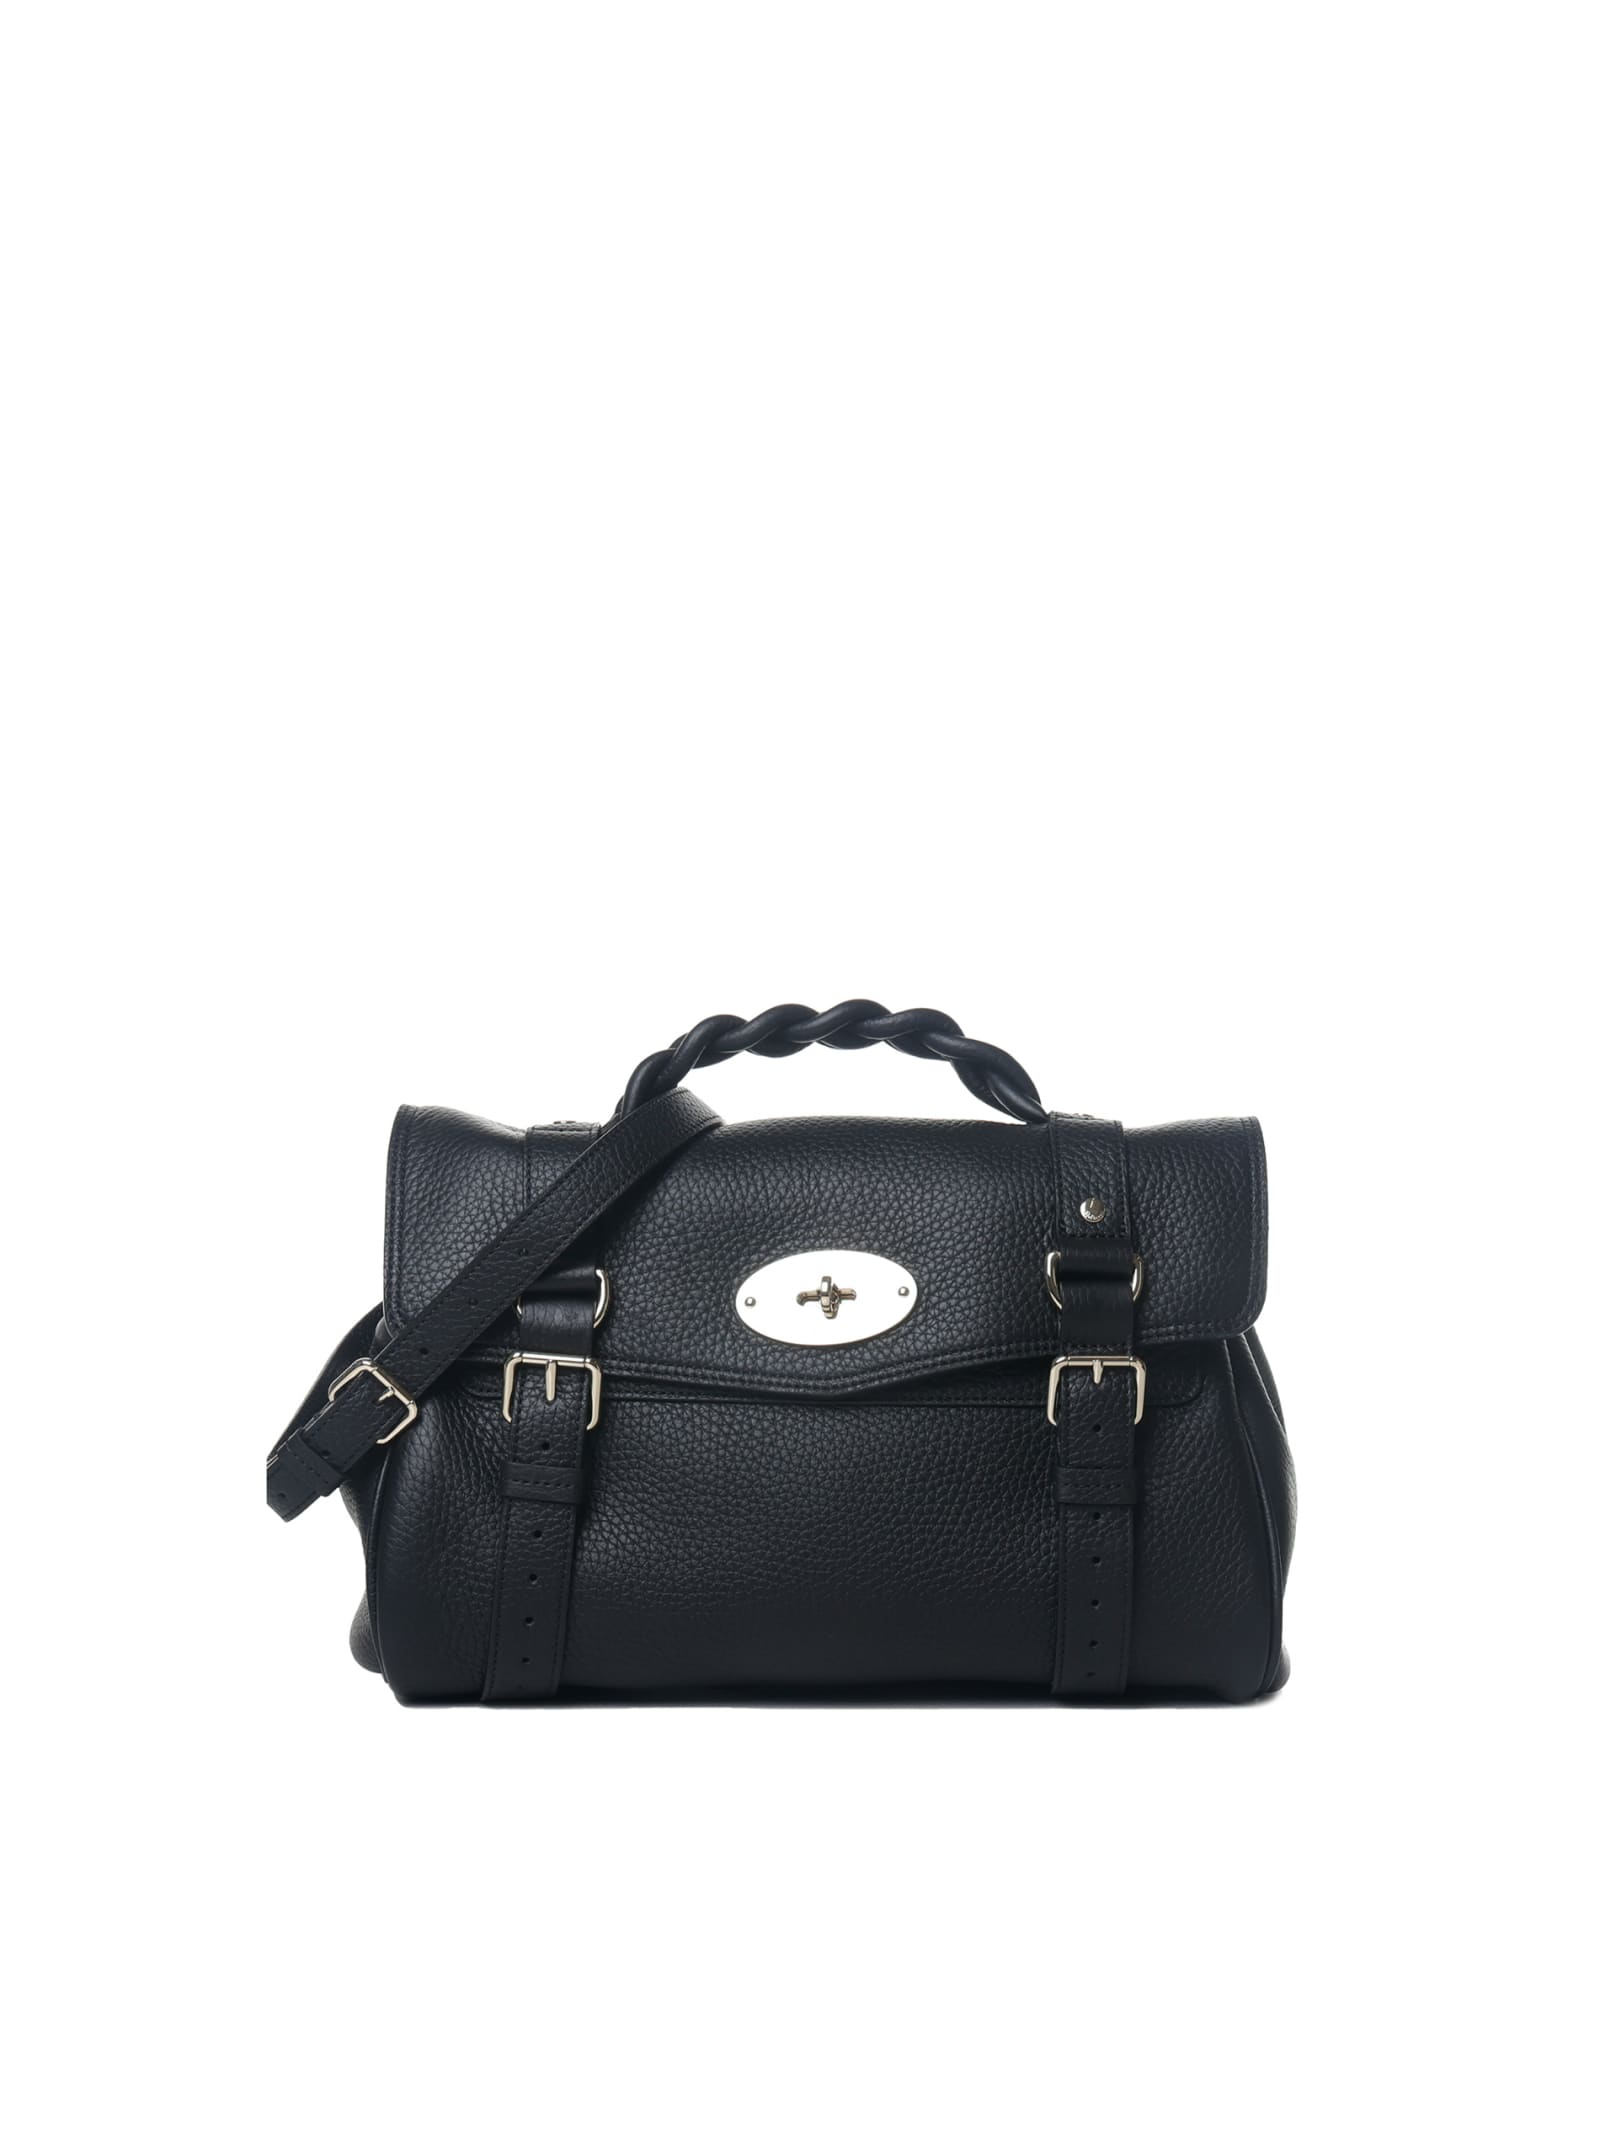 MULBERRY ALEXA BAG WITH LEATHER BRAIDED HANDLE